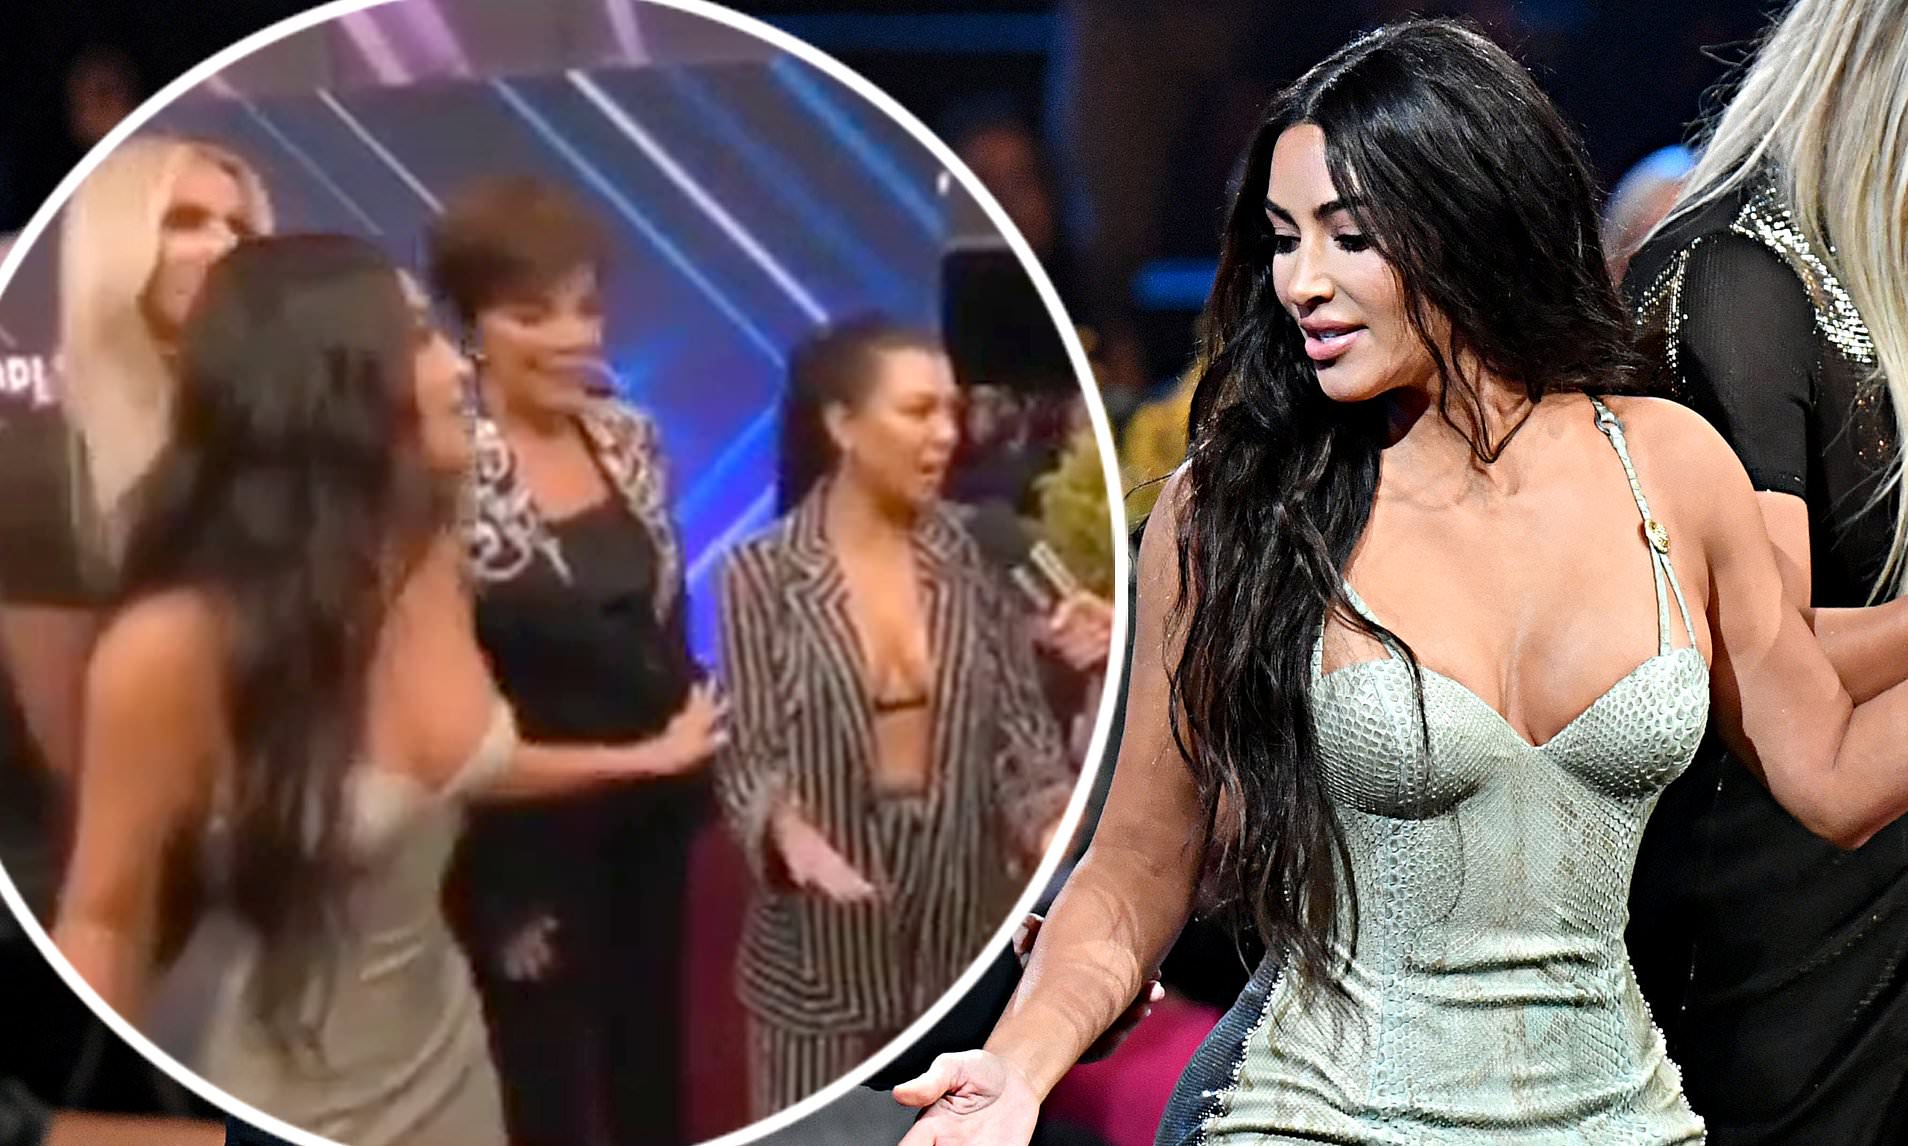 Kim Kardashian cuts off Kourtney during VERY awkward red carpet interview at People's Choice... as tension between sisters flares up again